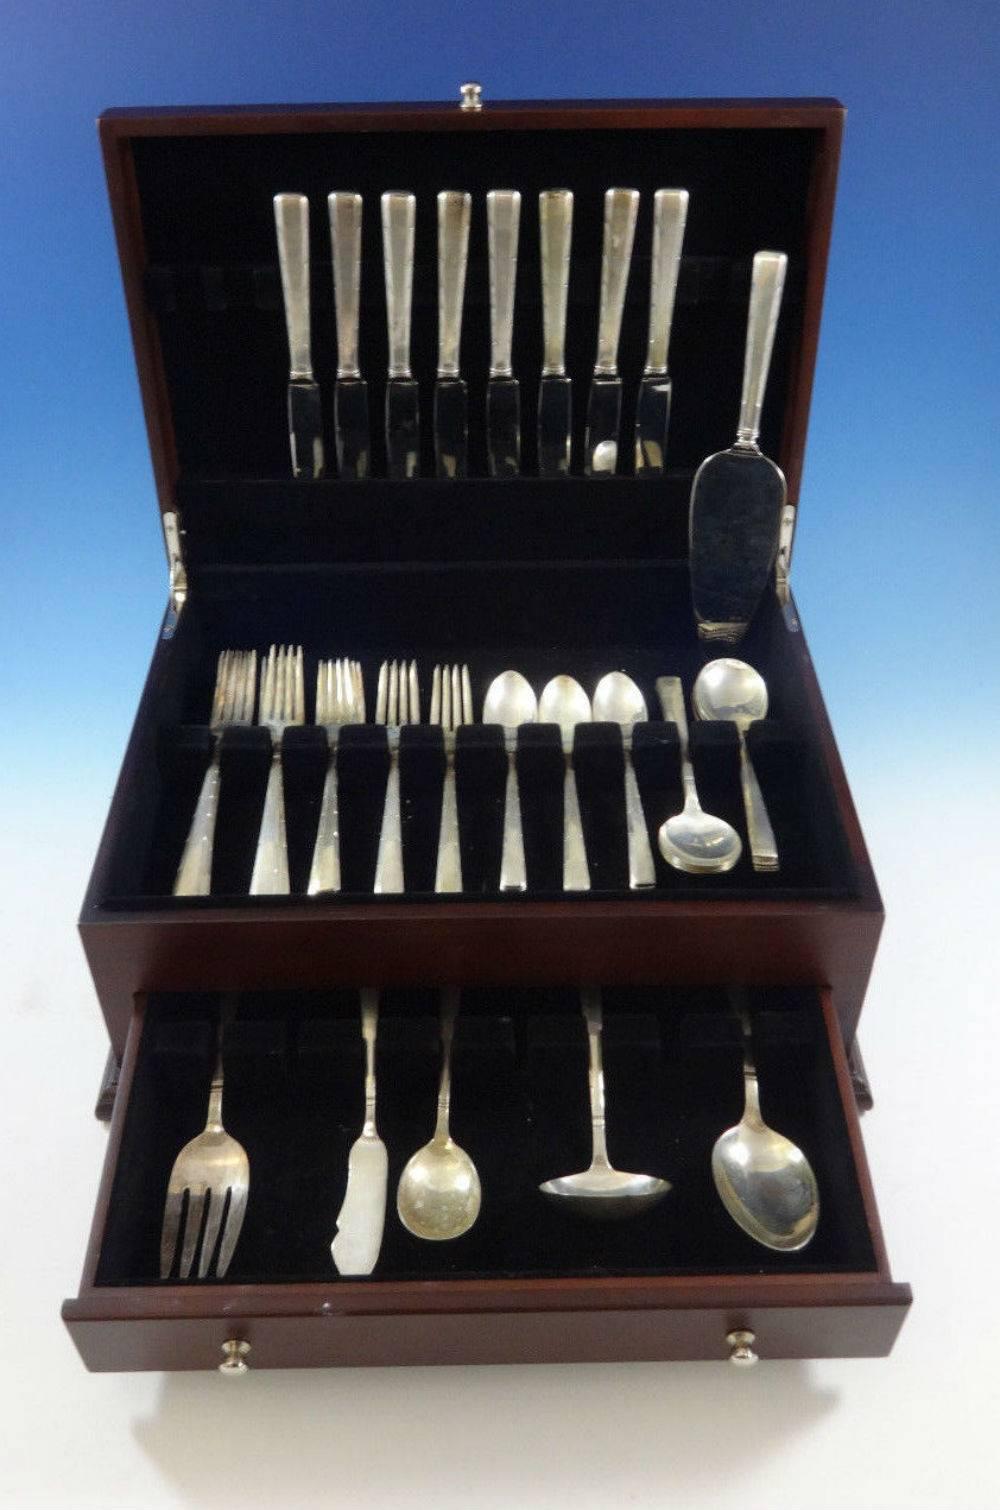 Horizon by Easterling Sterling Silver Flatware Set - 46 pieces. This set includes: 

Eight knives, 8 7/8